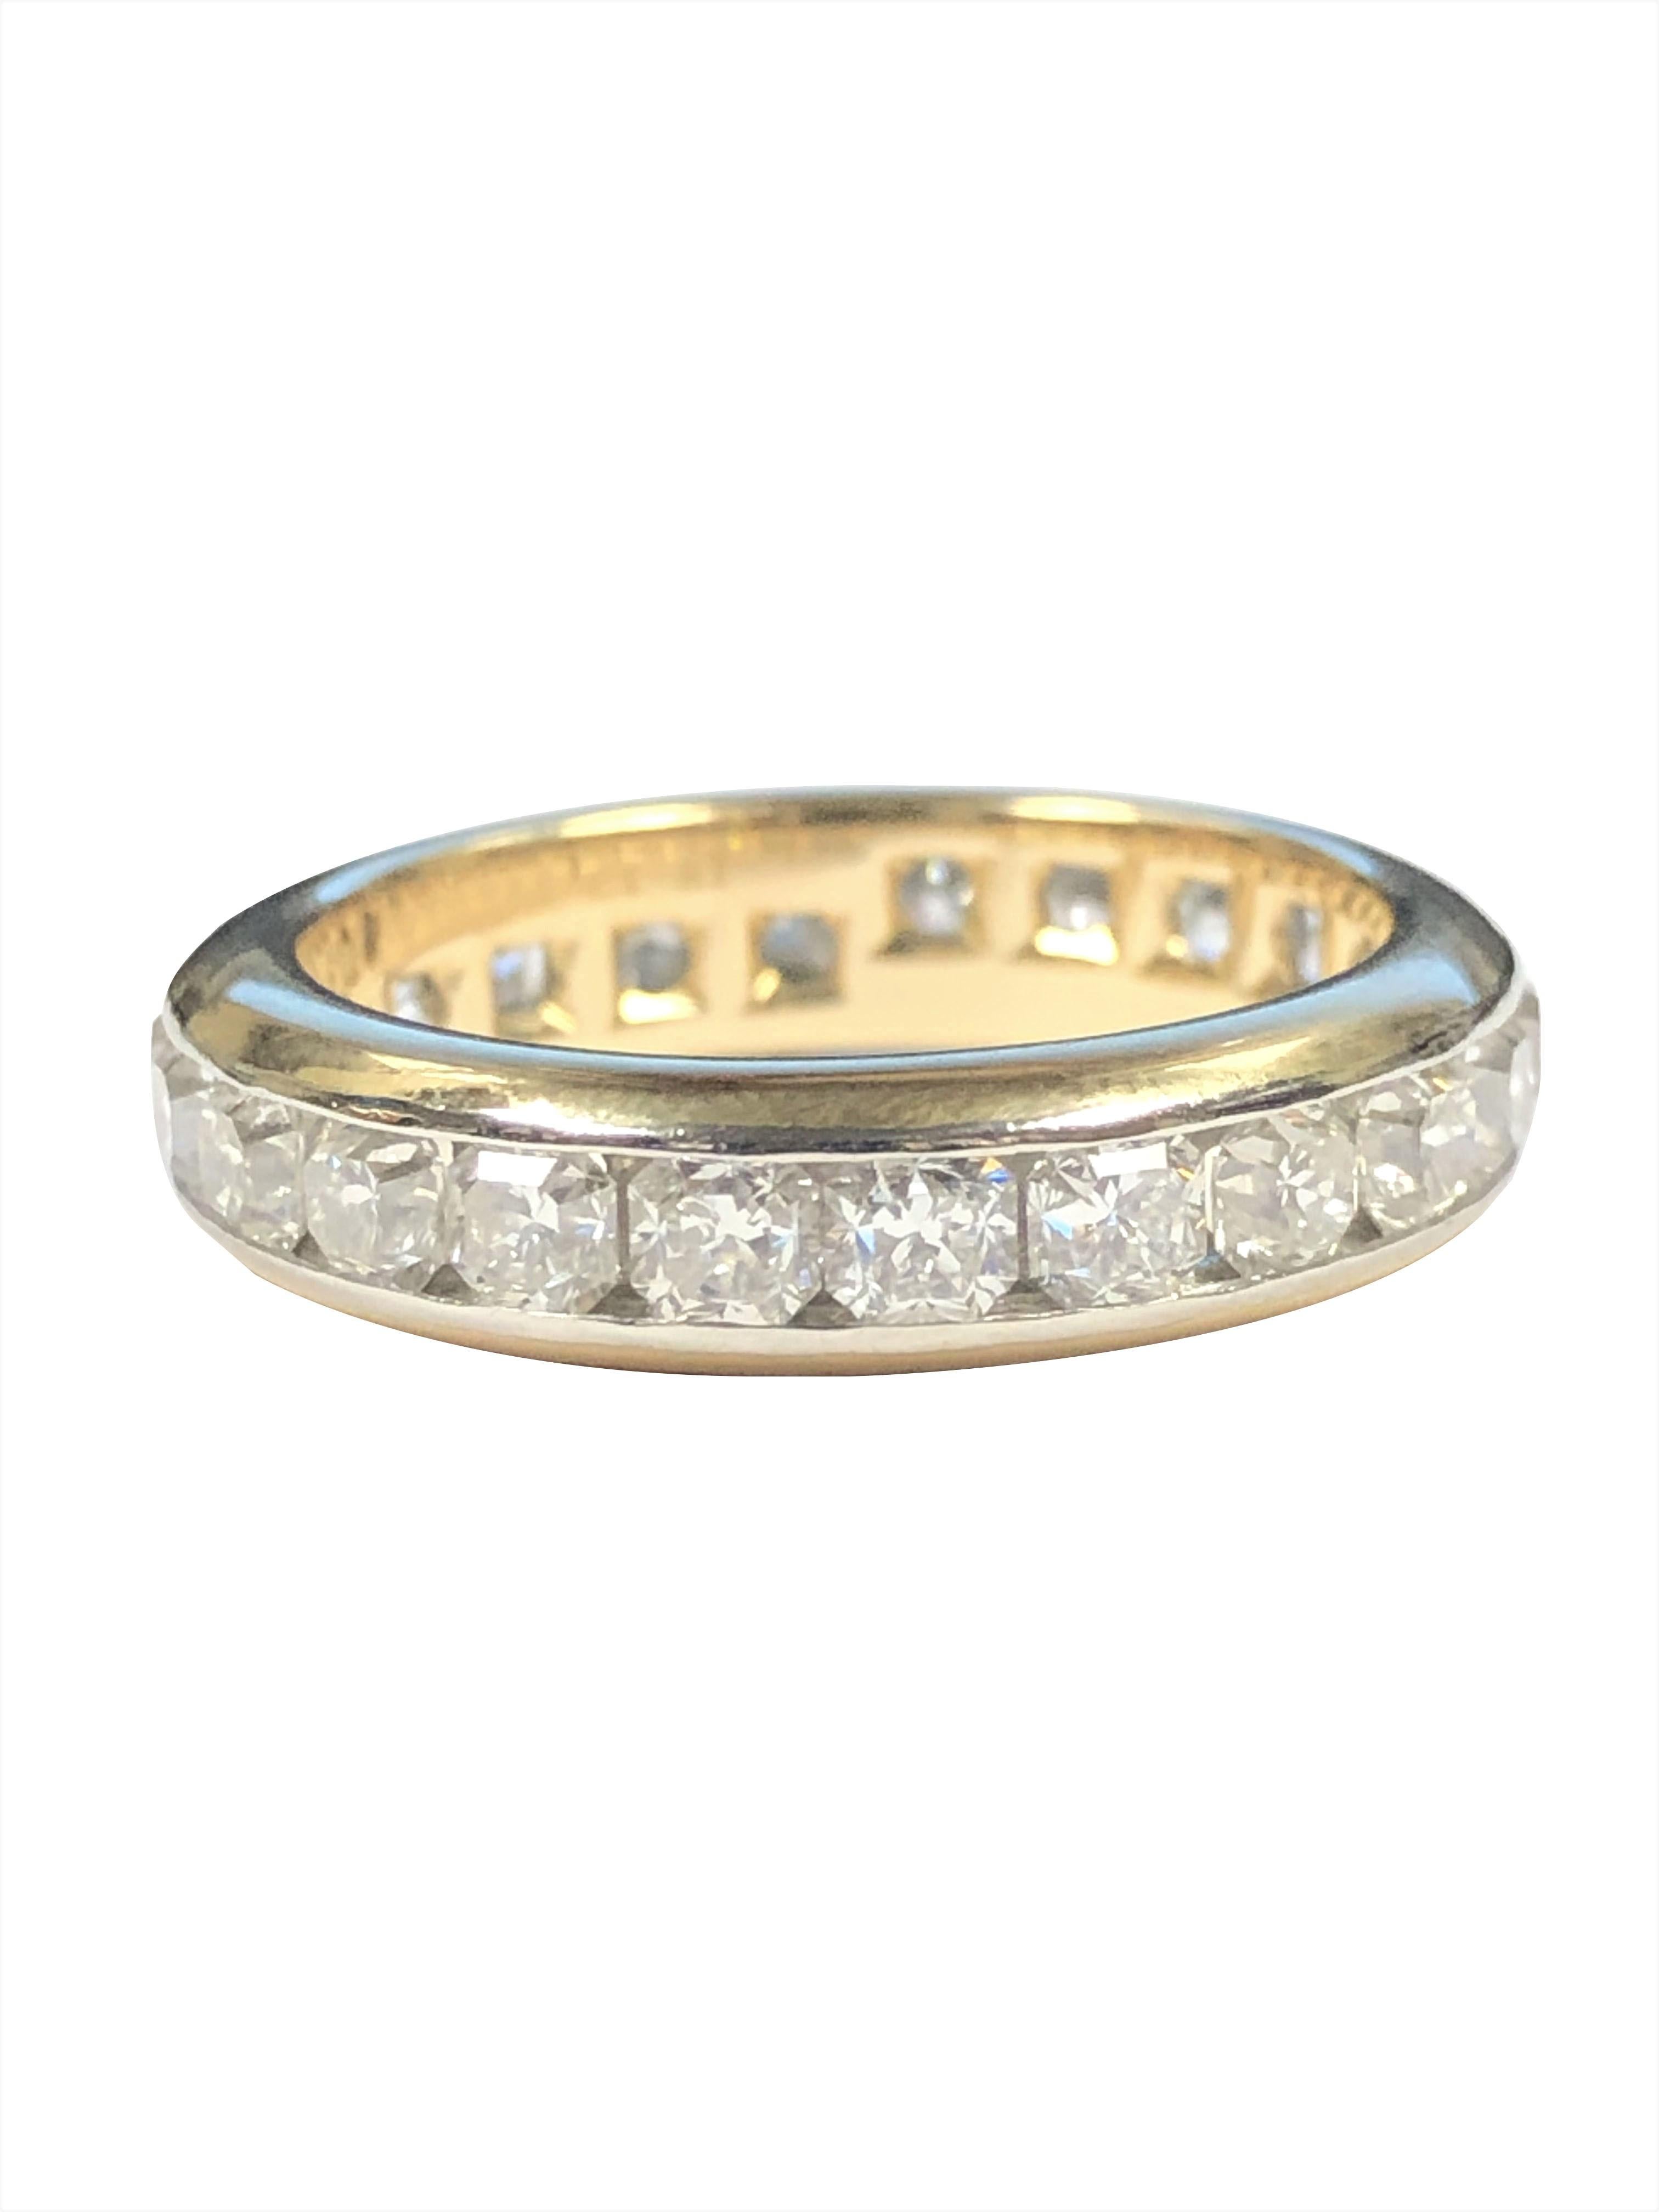 Women's or Men's Tiffany & Company Platinum and 18k Lucida Diamond Eternity Band Ring For Sale